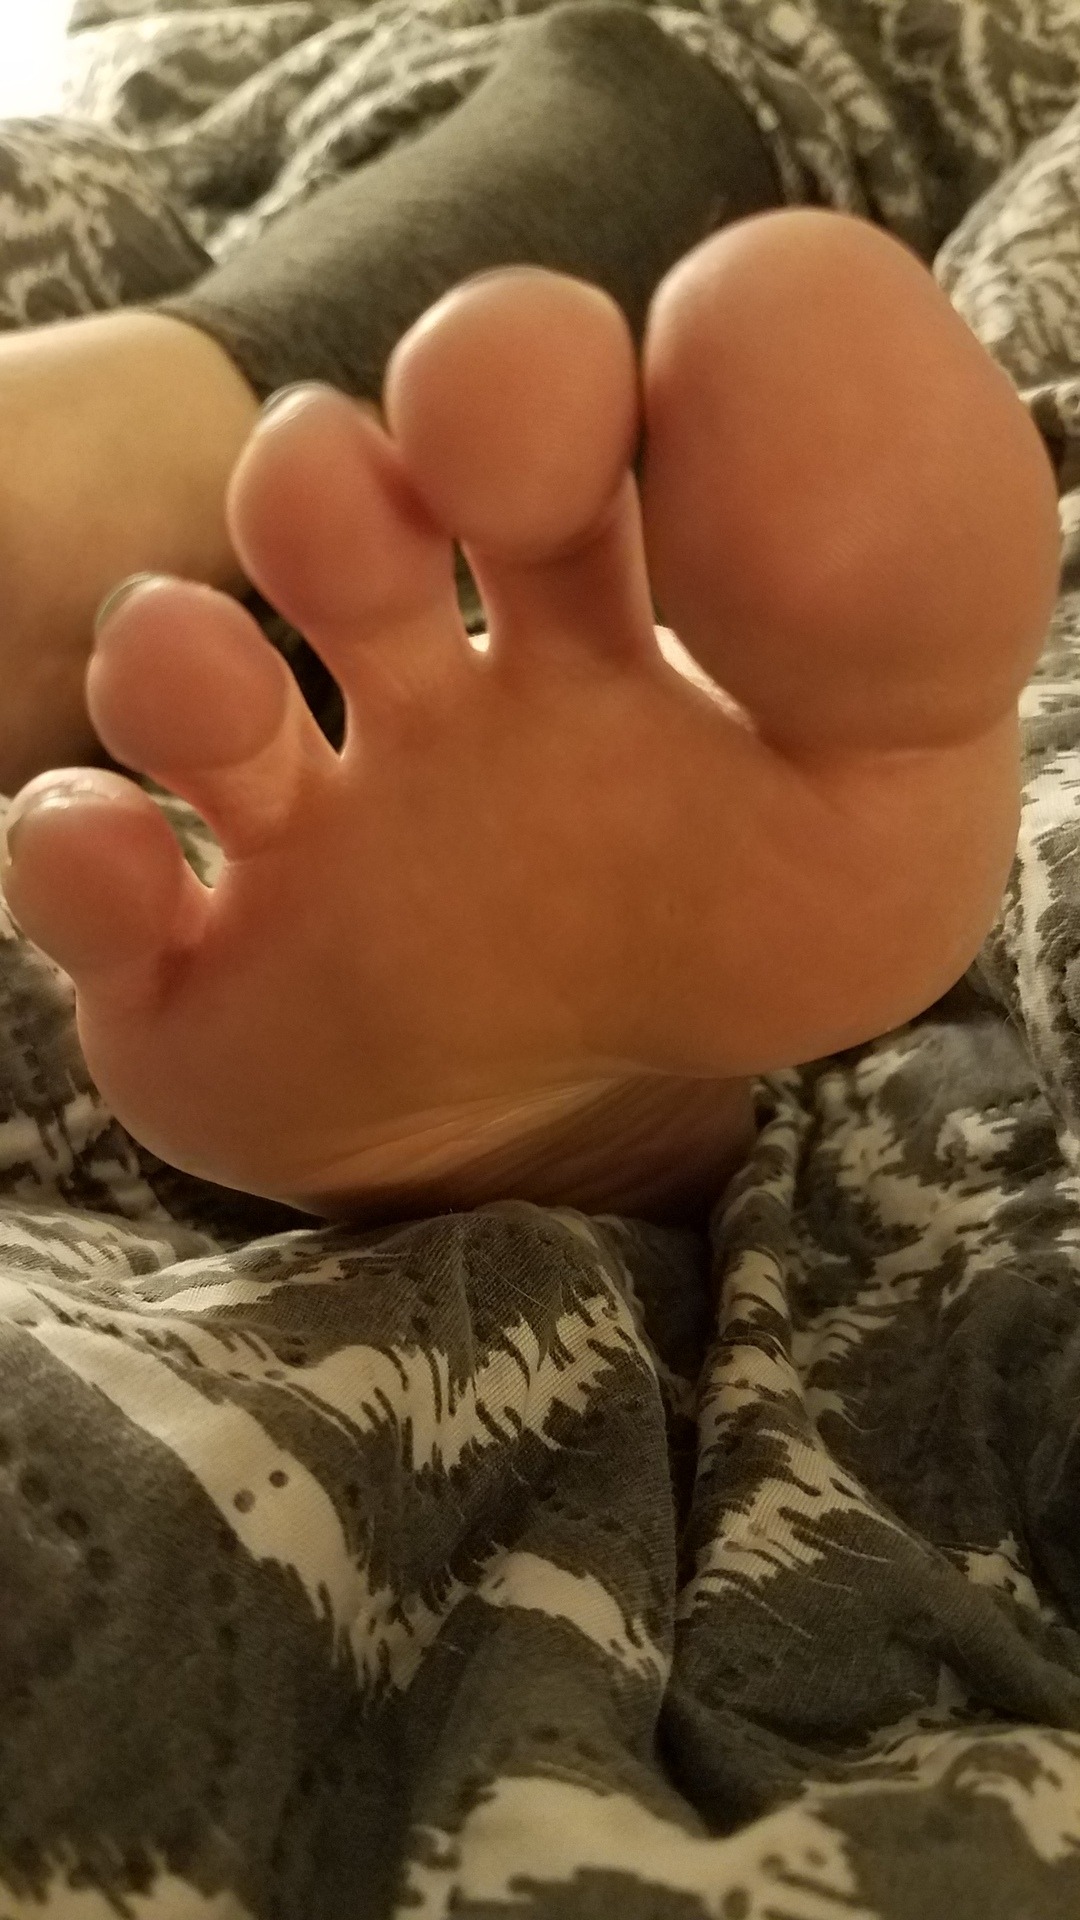 myprettywifesfeet:  A beautiful close up before bedtime.please comment